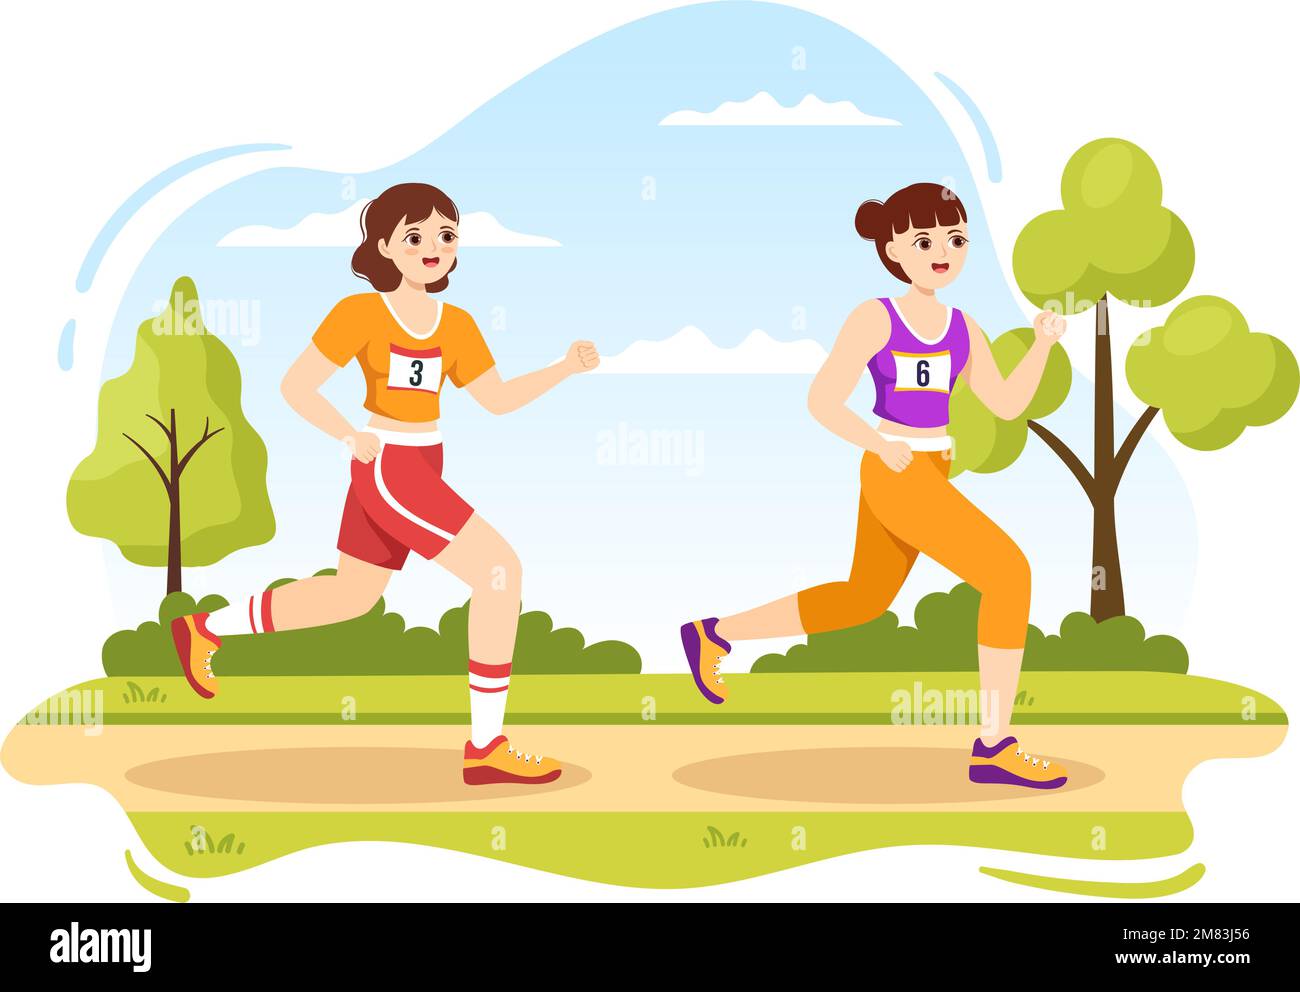 Marathon Race Illustration with People Running, Jogging Sport Tournament and Run to Reach the Finish Line in Flat Cartoon Hand Drawn Template Stock Vector